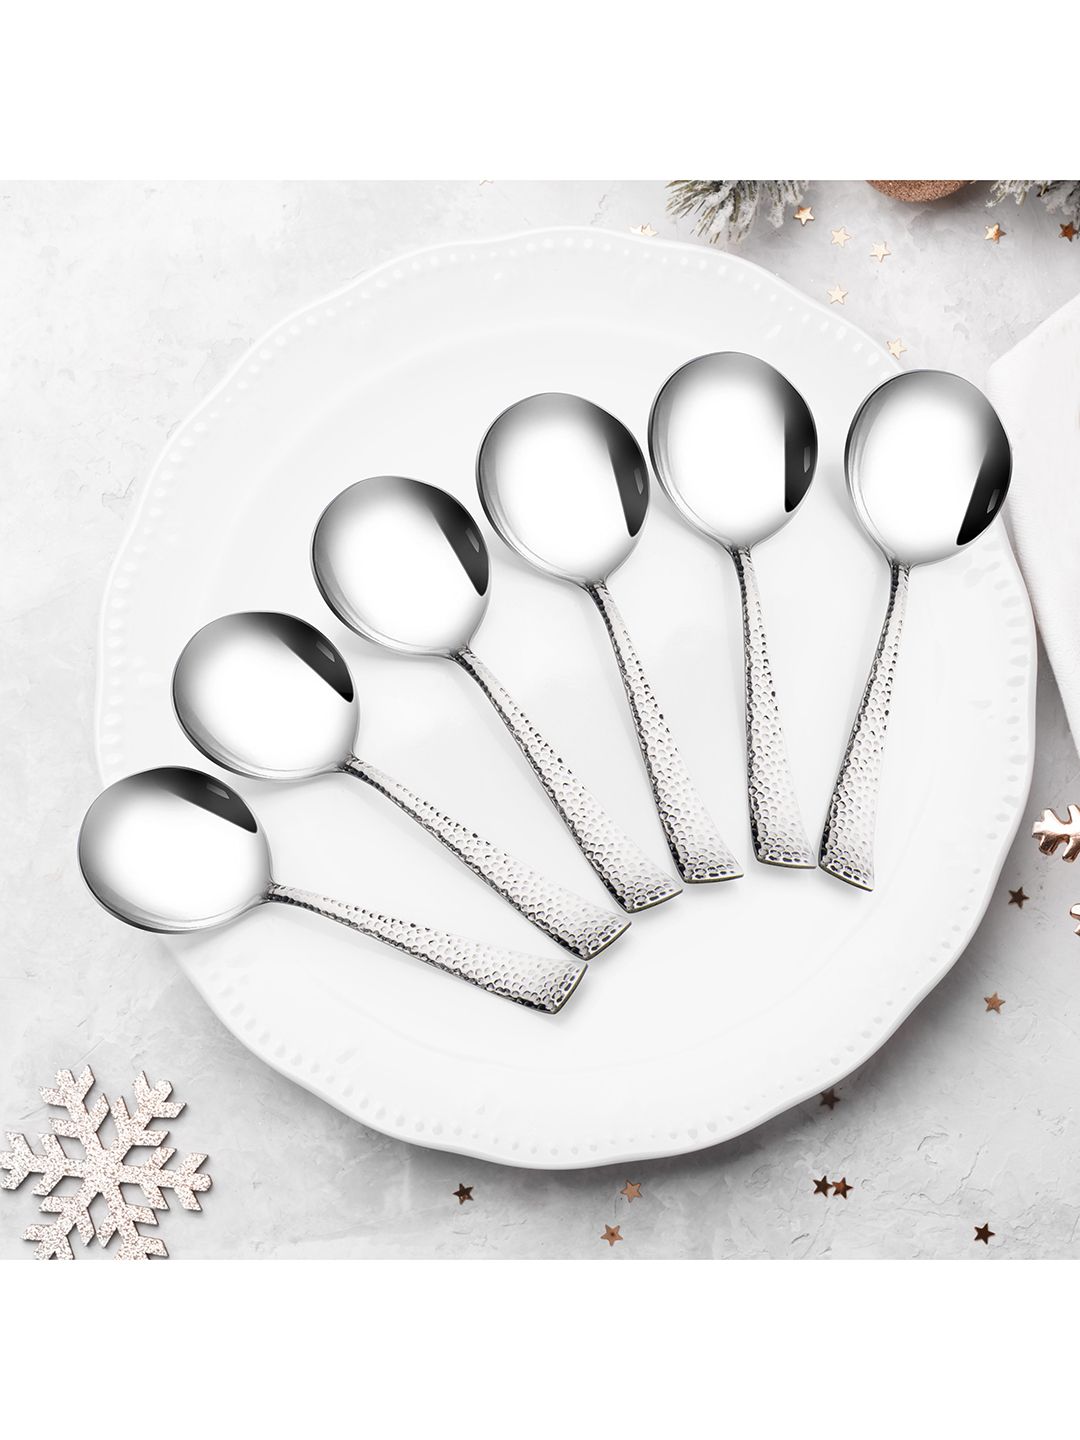 Athome by Nilkamal Set Of 6 Silver-Toned Vintage Soup Spoons Price in India